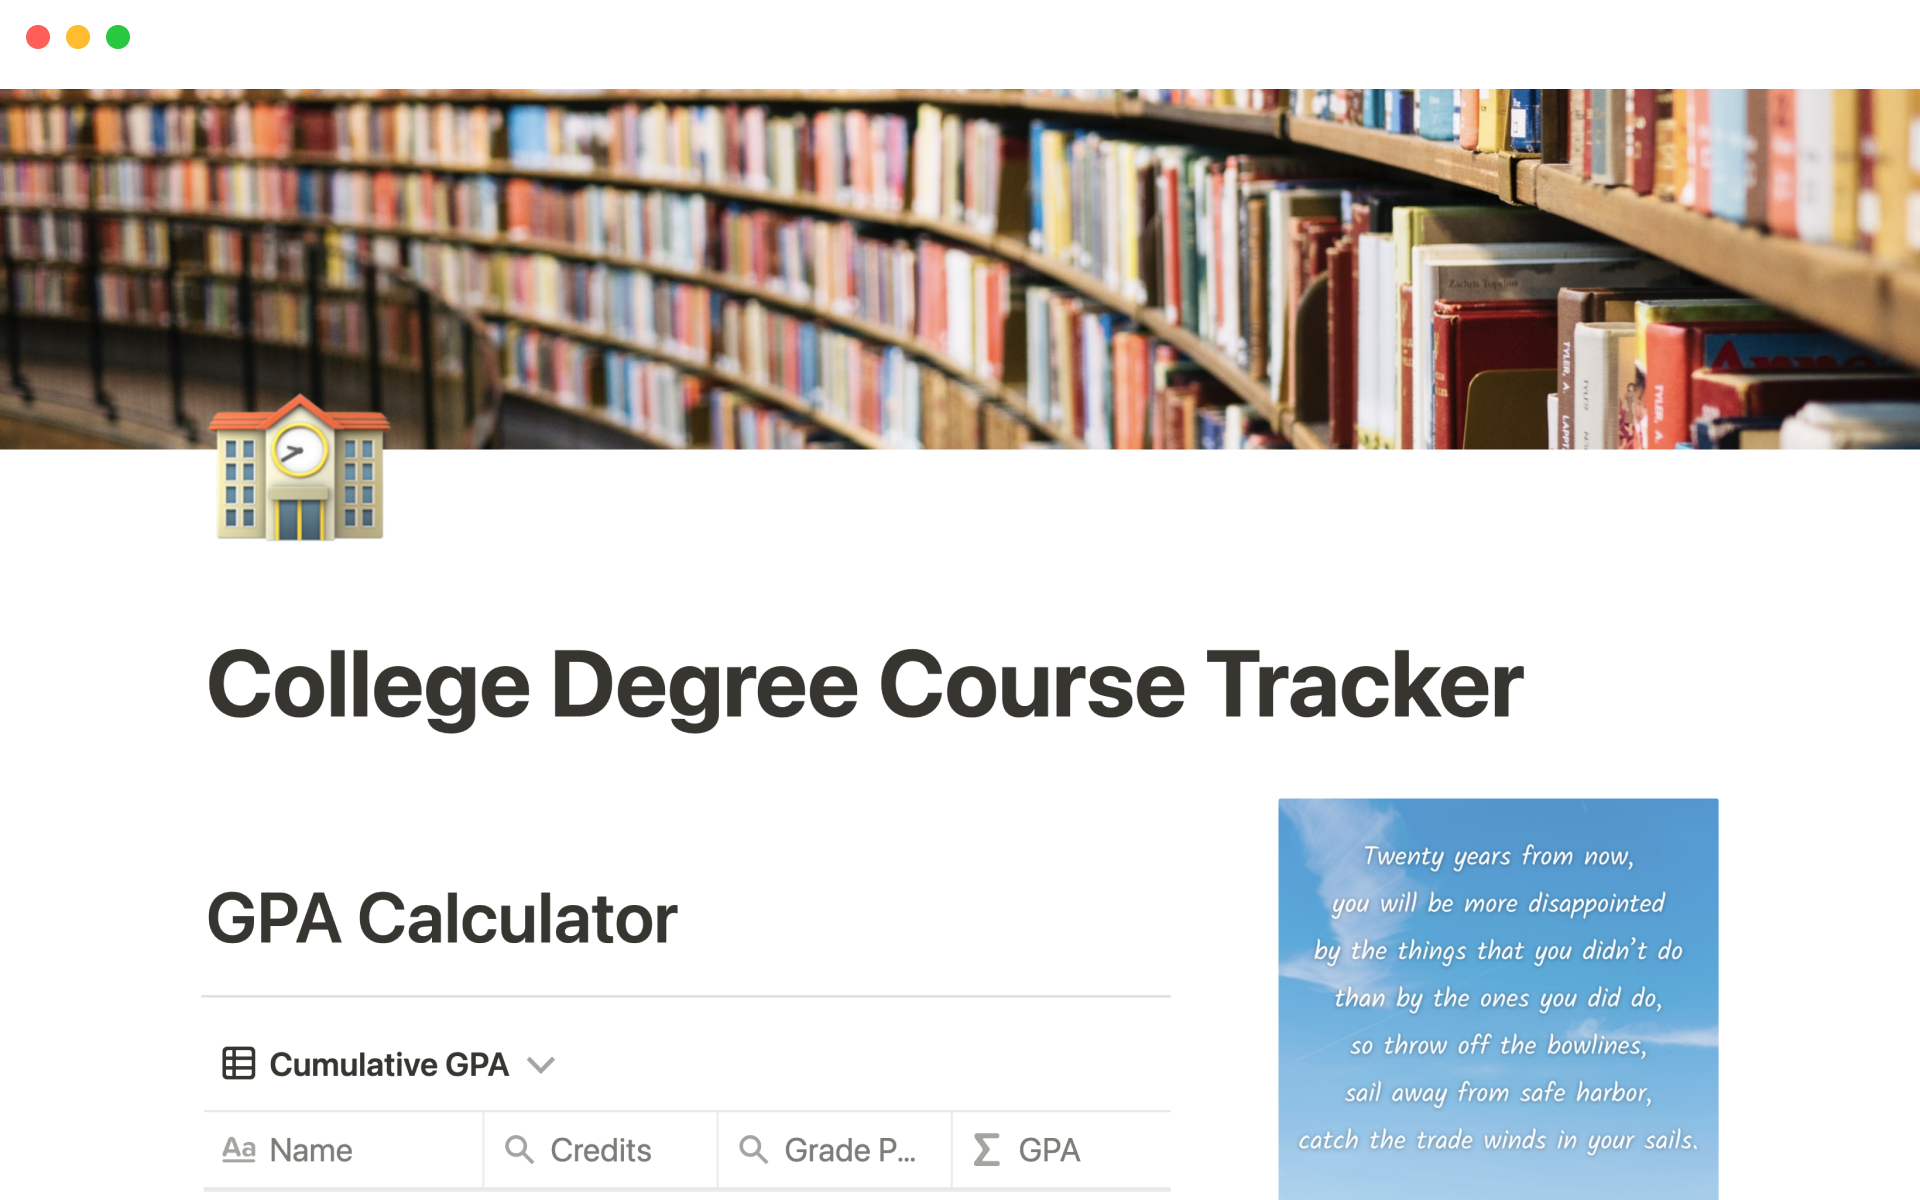 Keep up with courses and grades and plan out your degree and requirements.